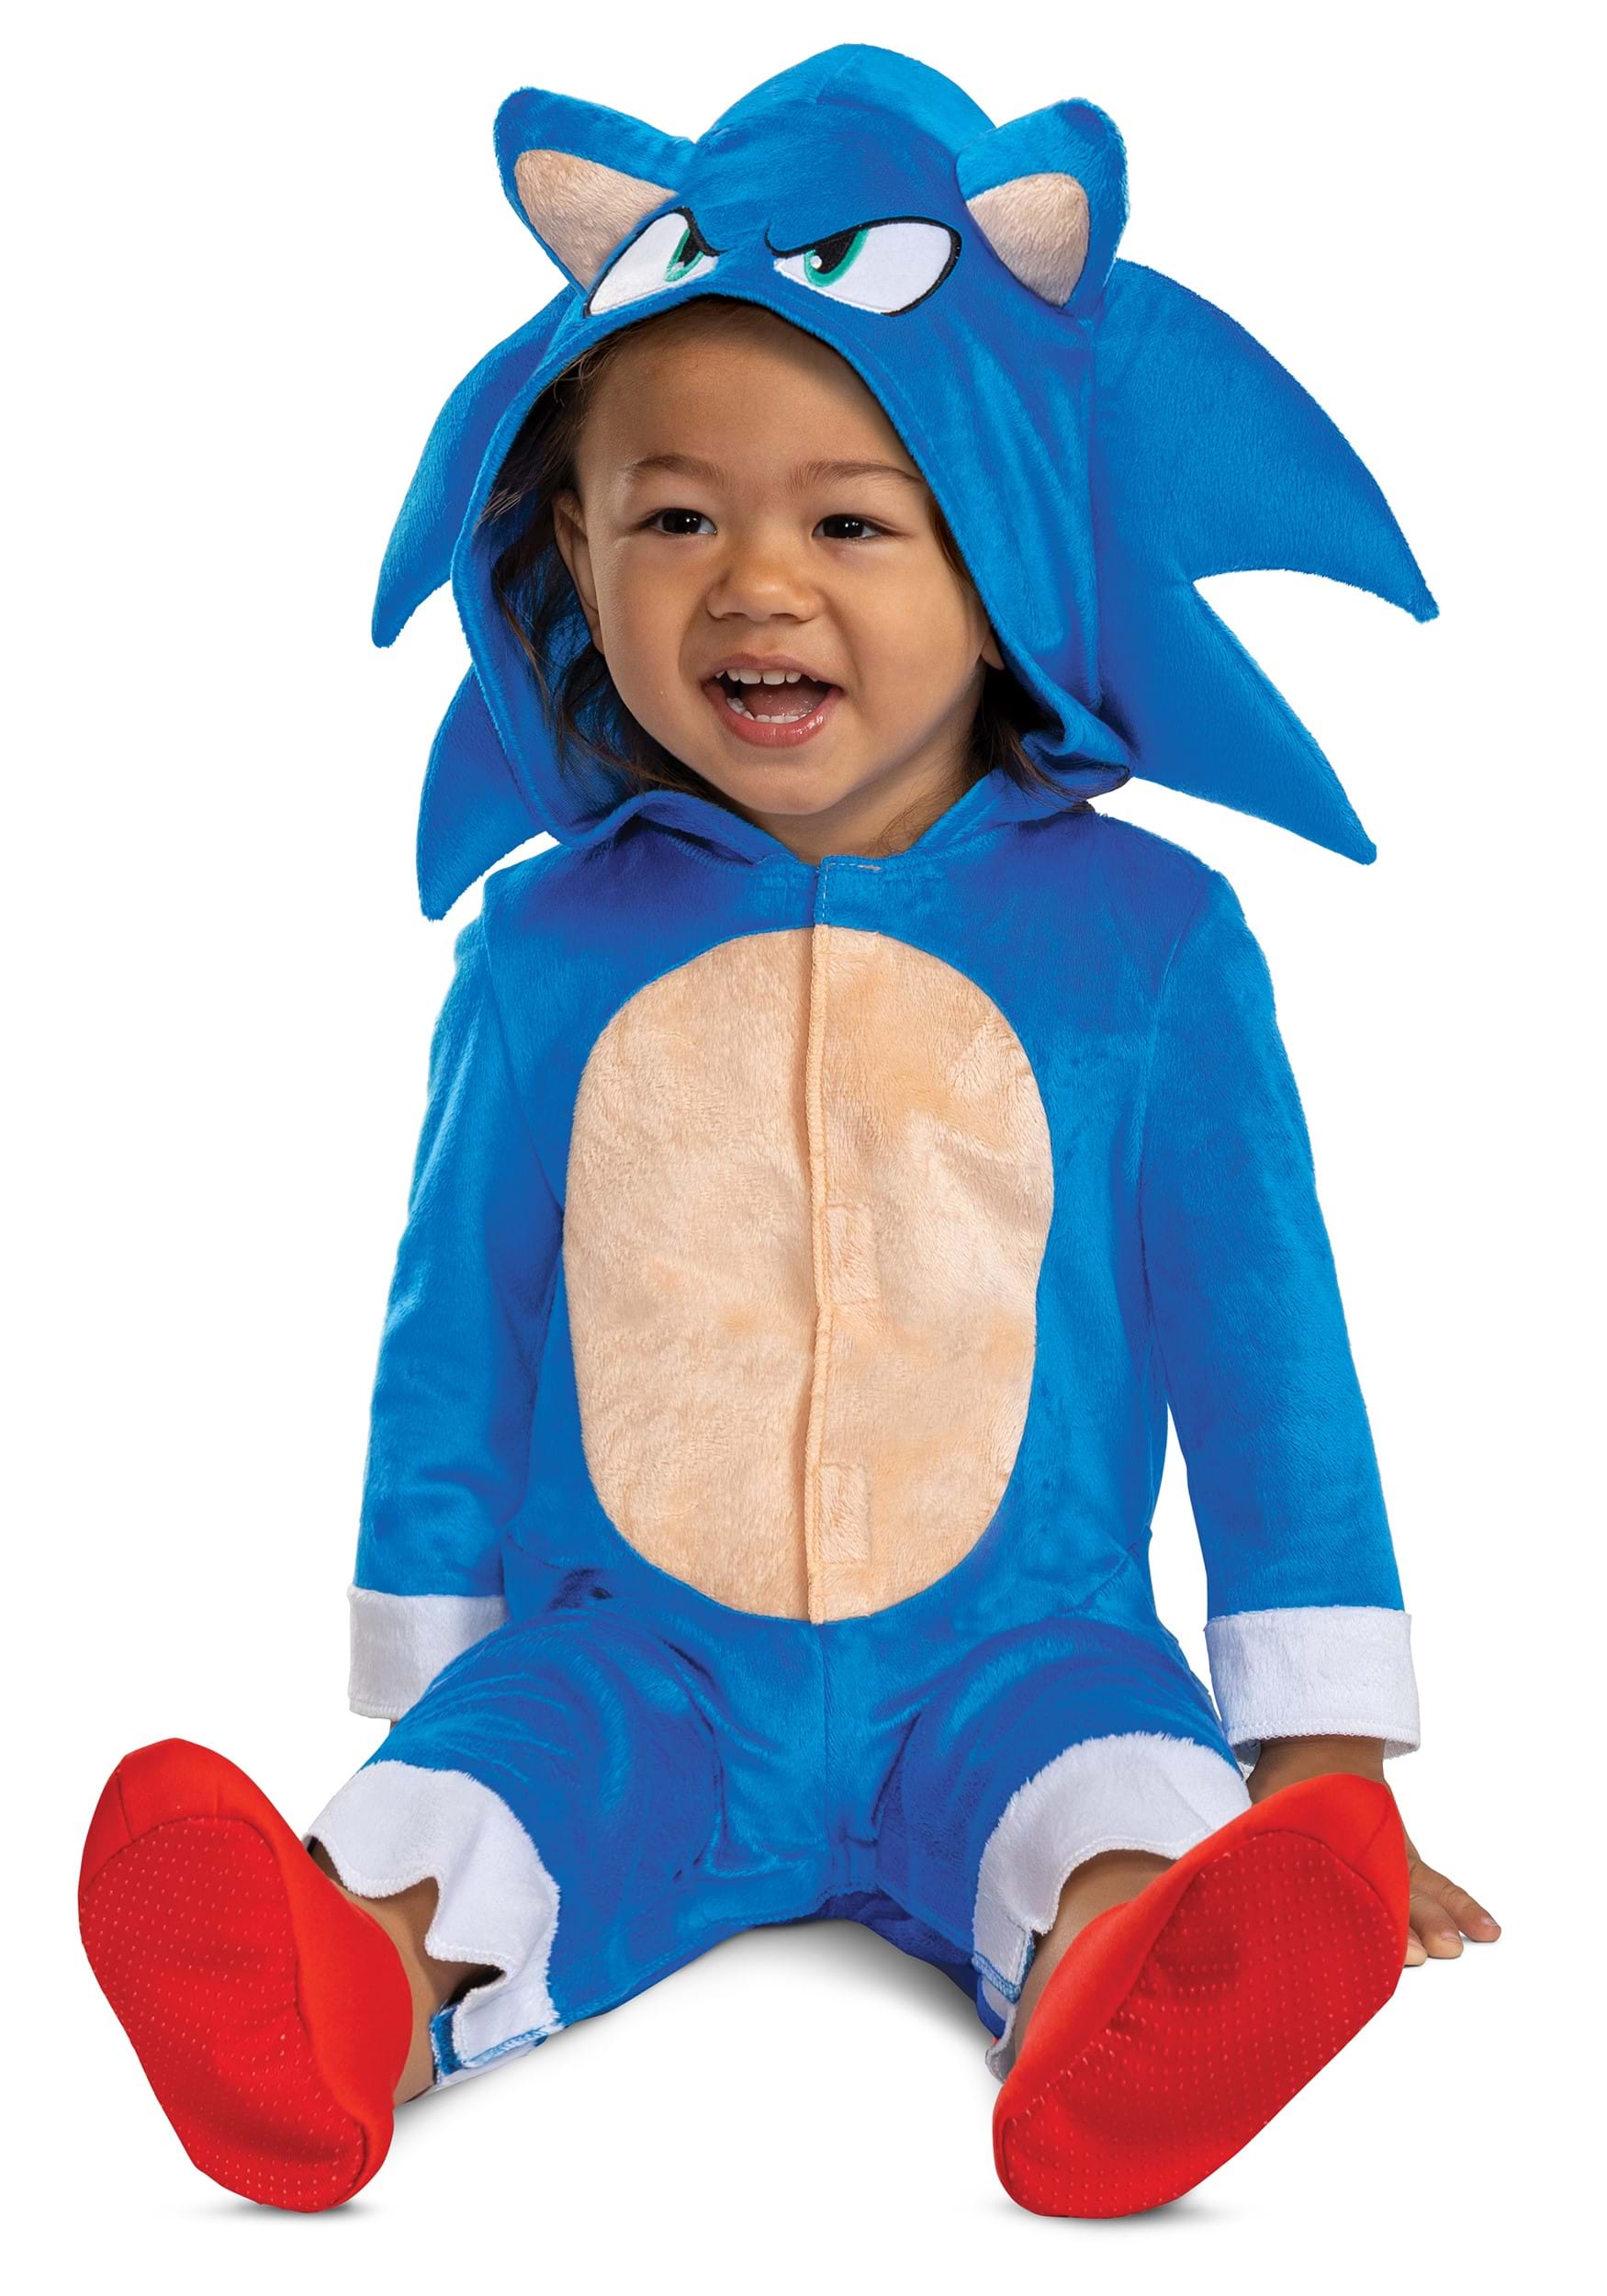 sonic as a baby